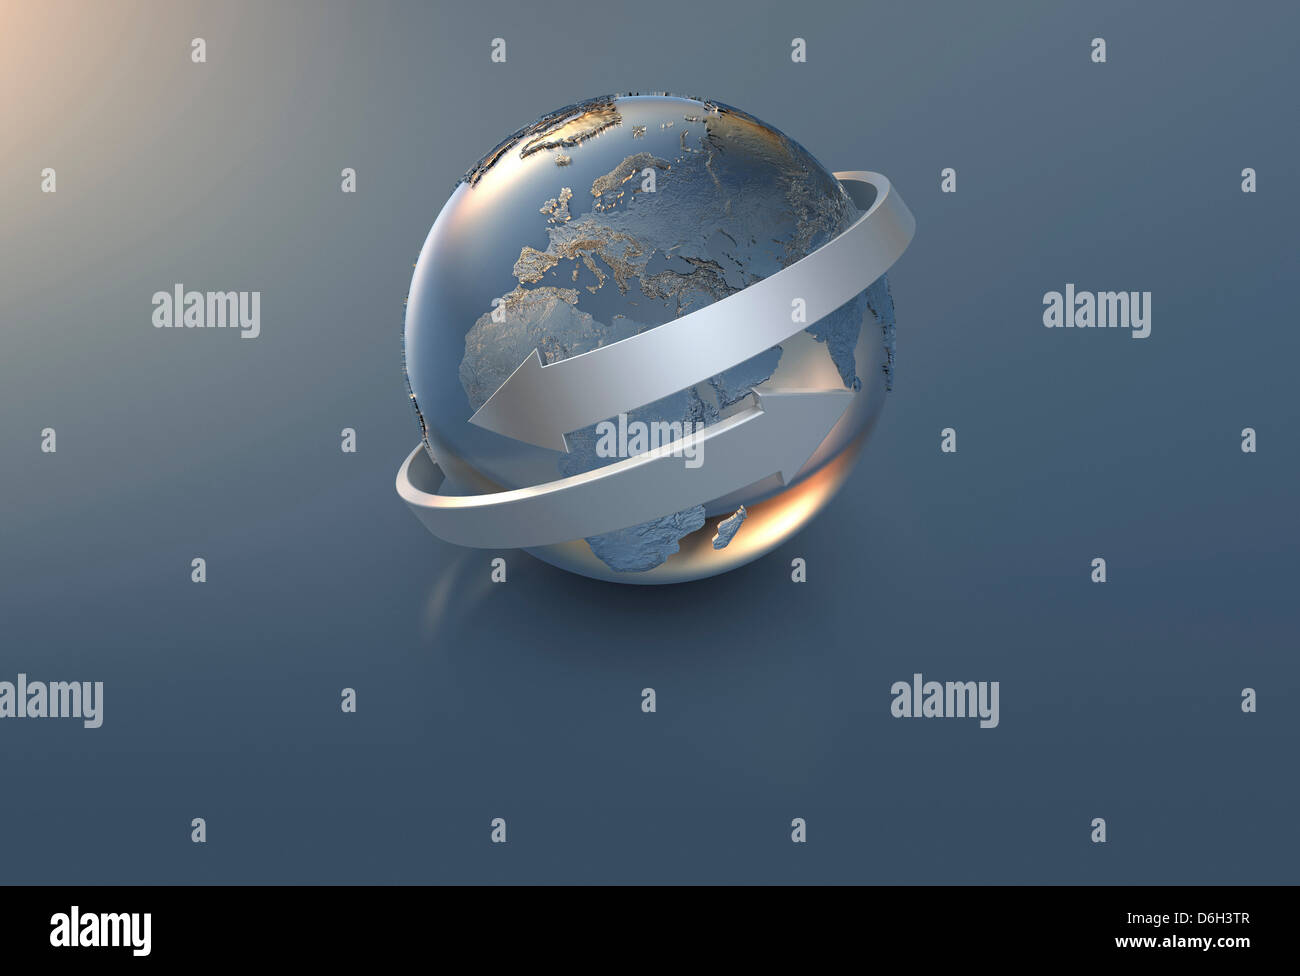 Illustration of arrows and silver globe Stock Photo